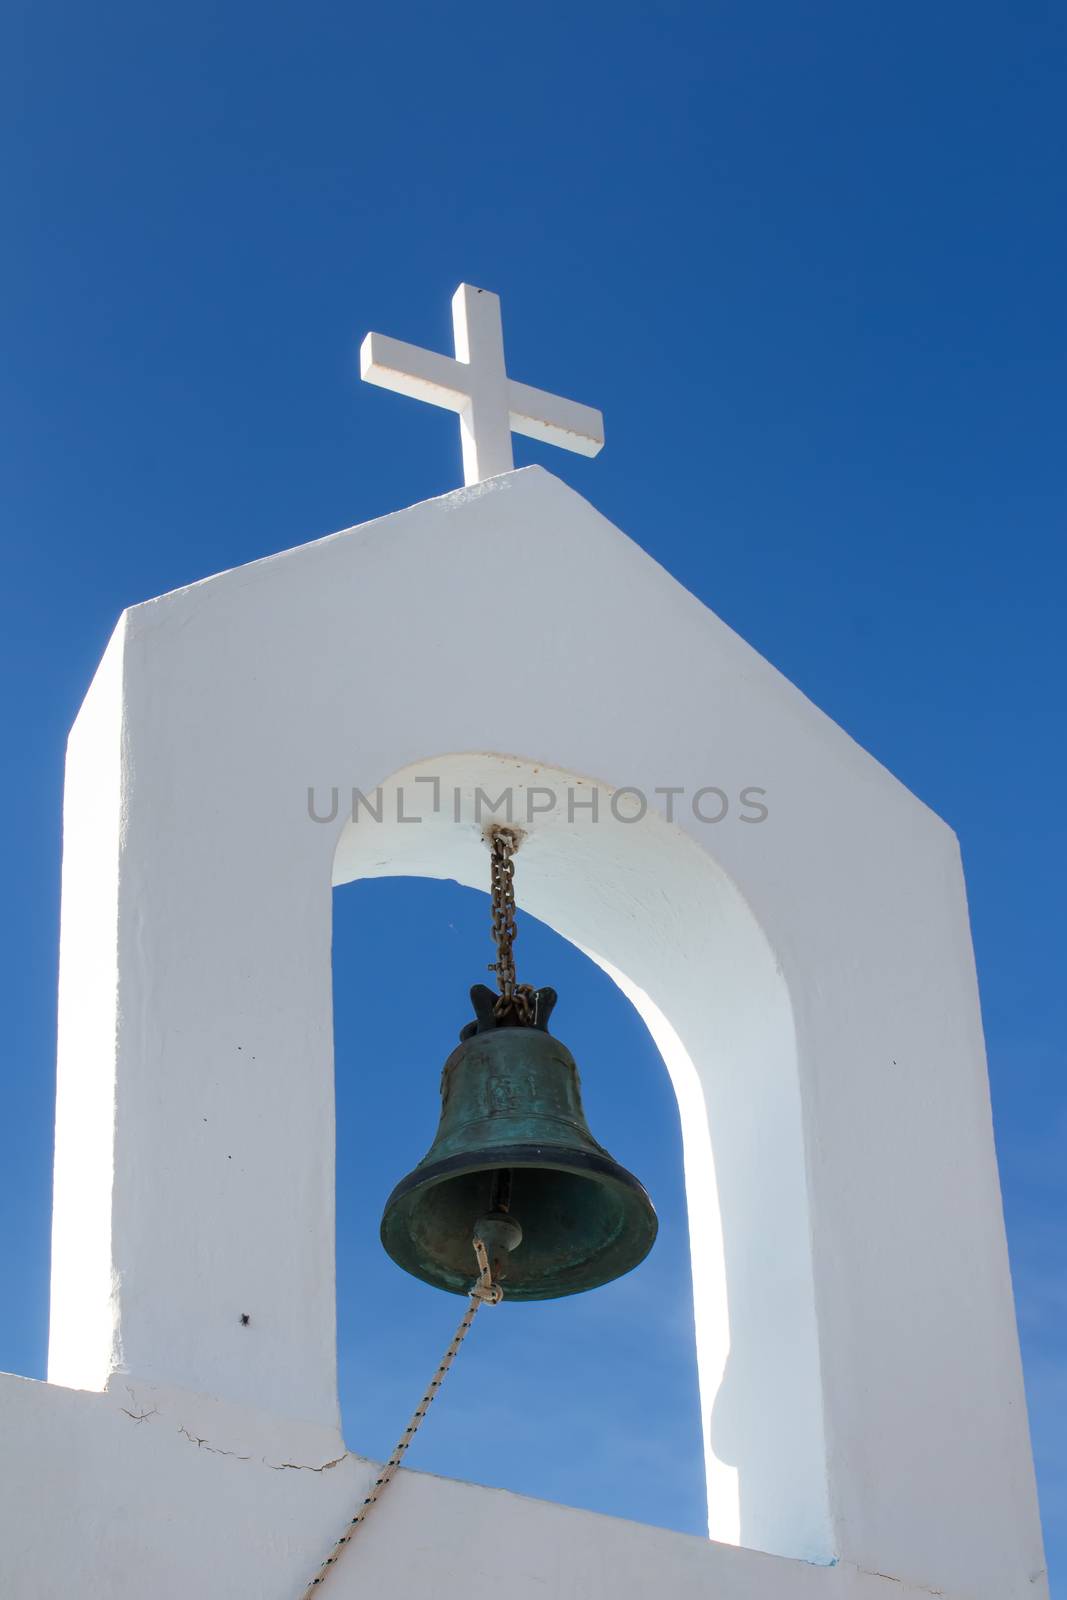 Detail of the architecture of a chapel in Greece. Heavy bell with a rope to use it. White tower with a cross. Bright blue sky in the background.